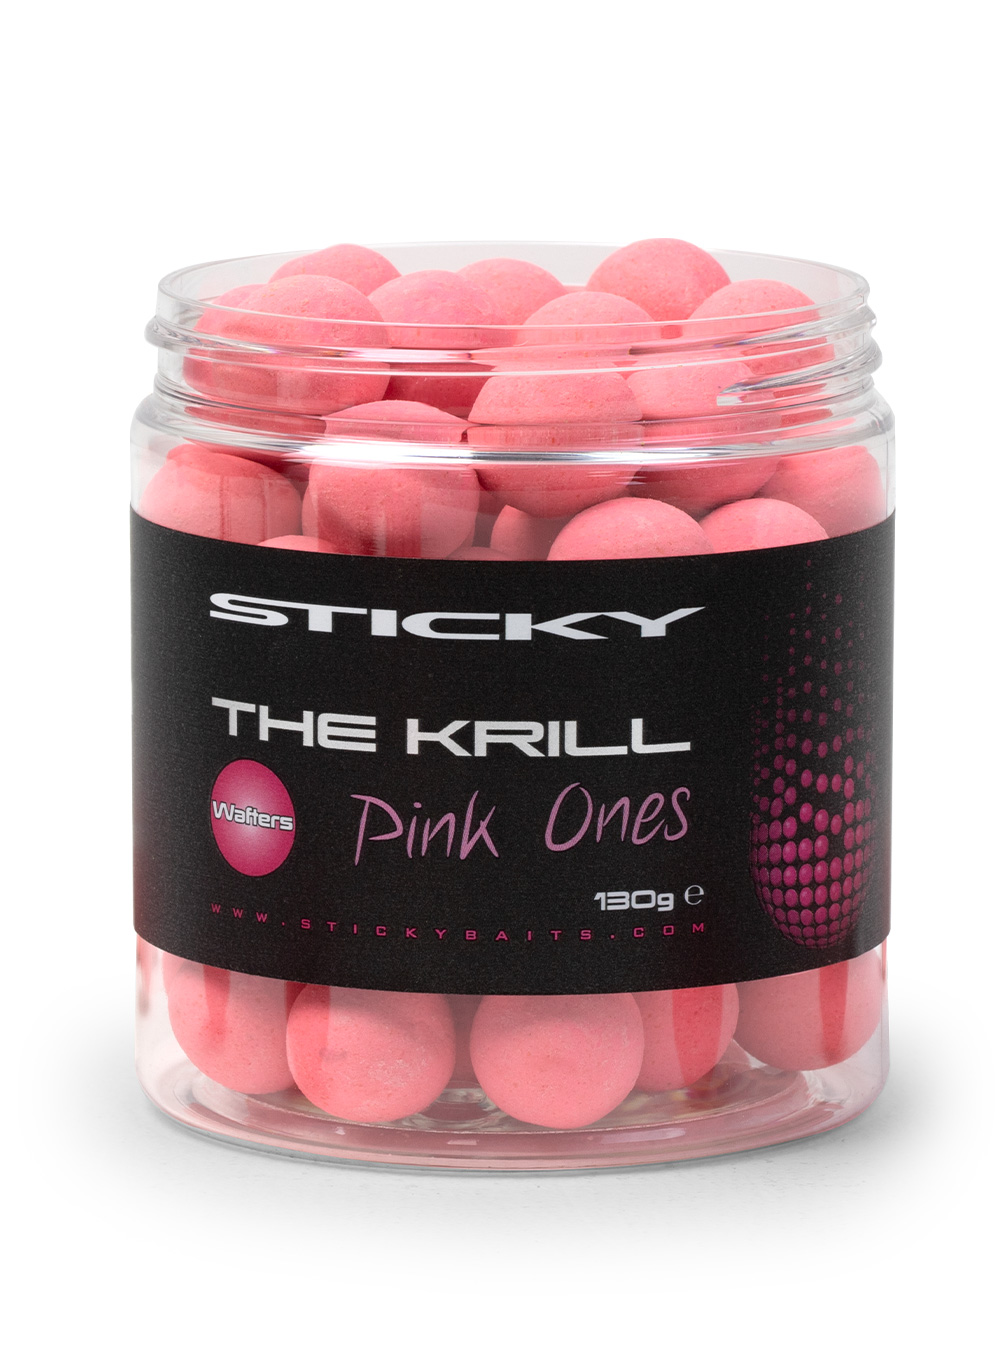 Sticky Baits The Krill 'Pink Ones' pop-ups